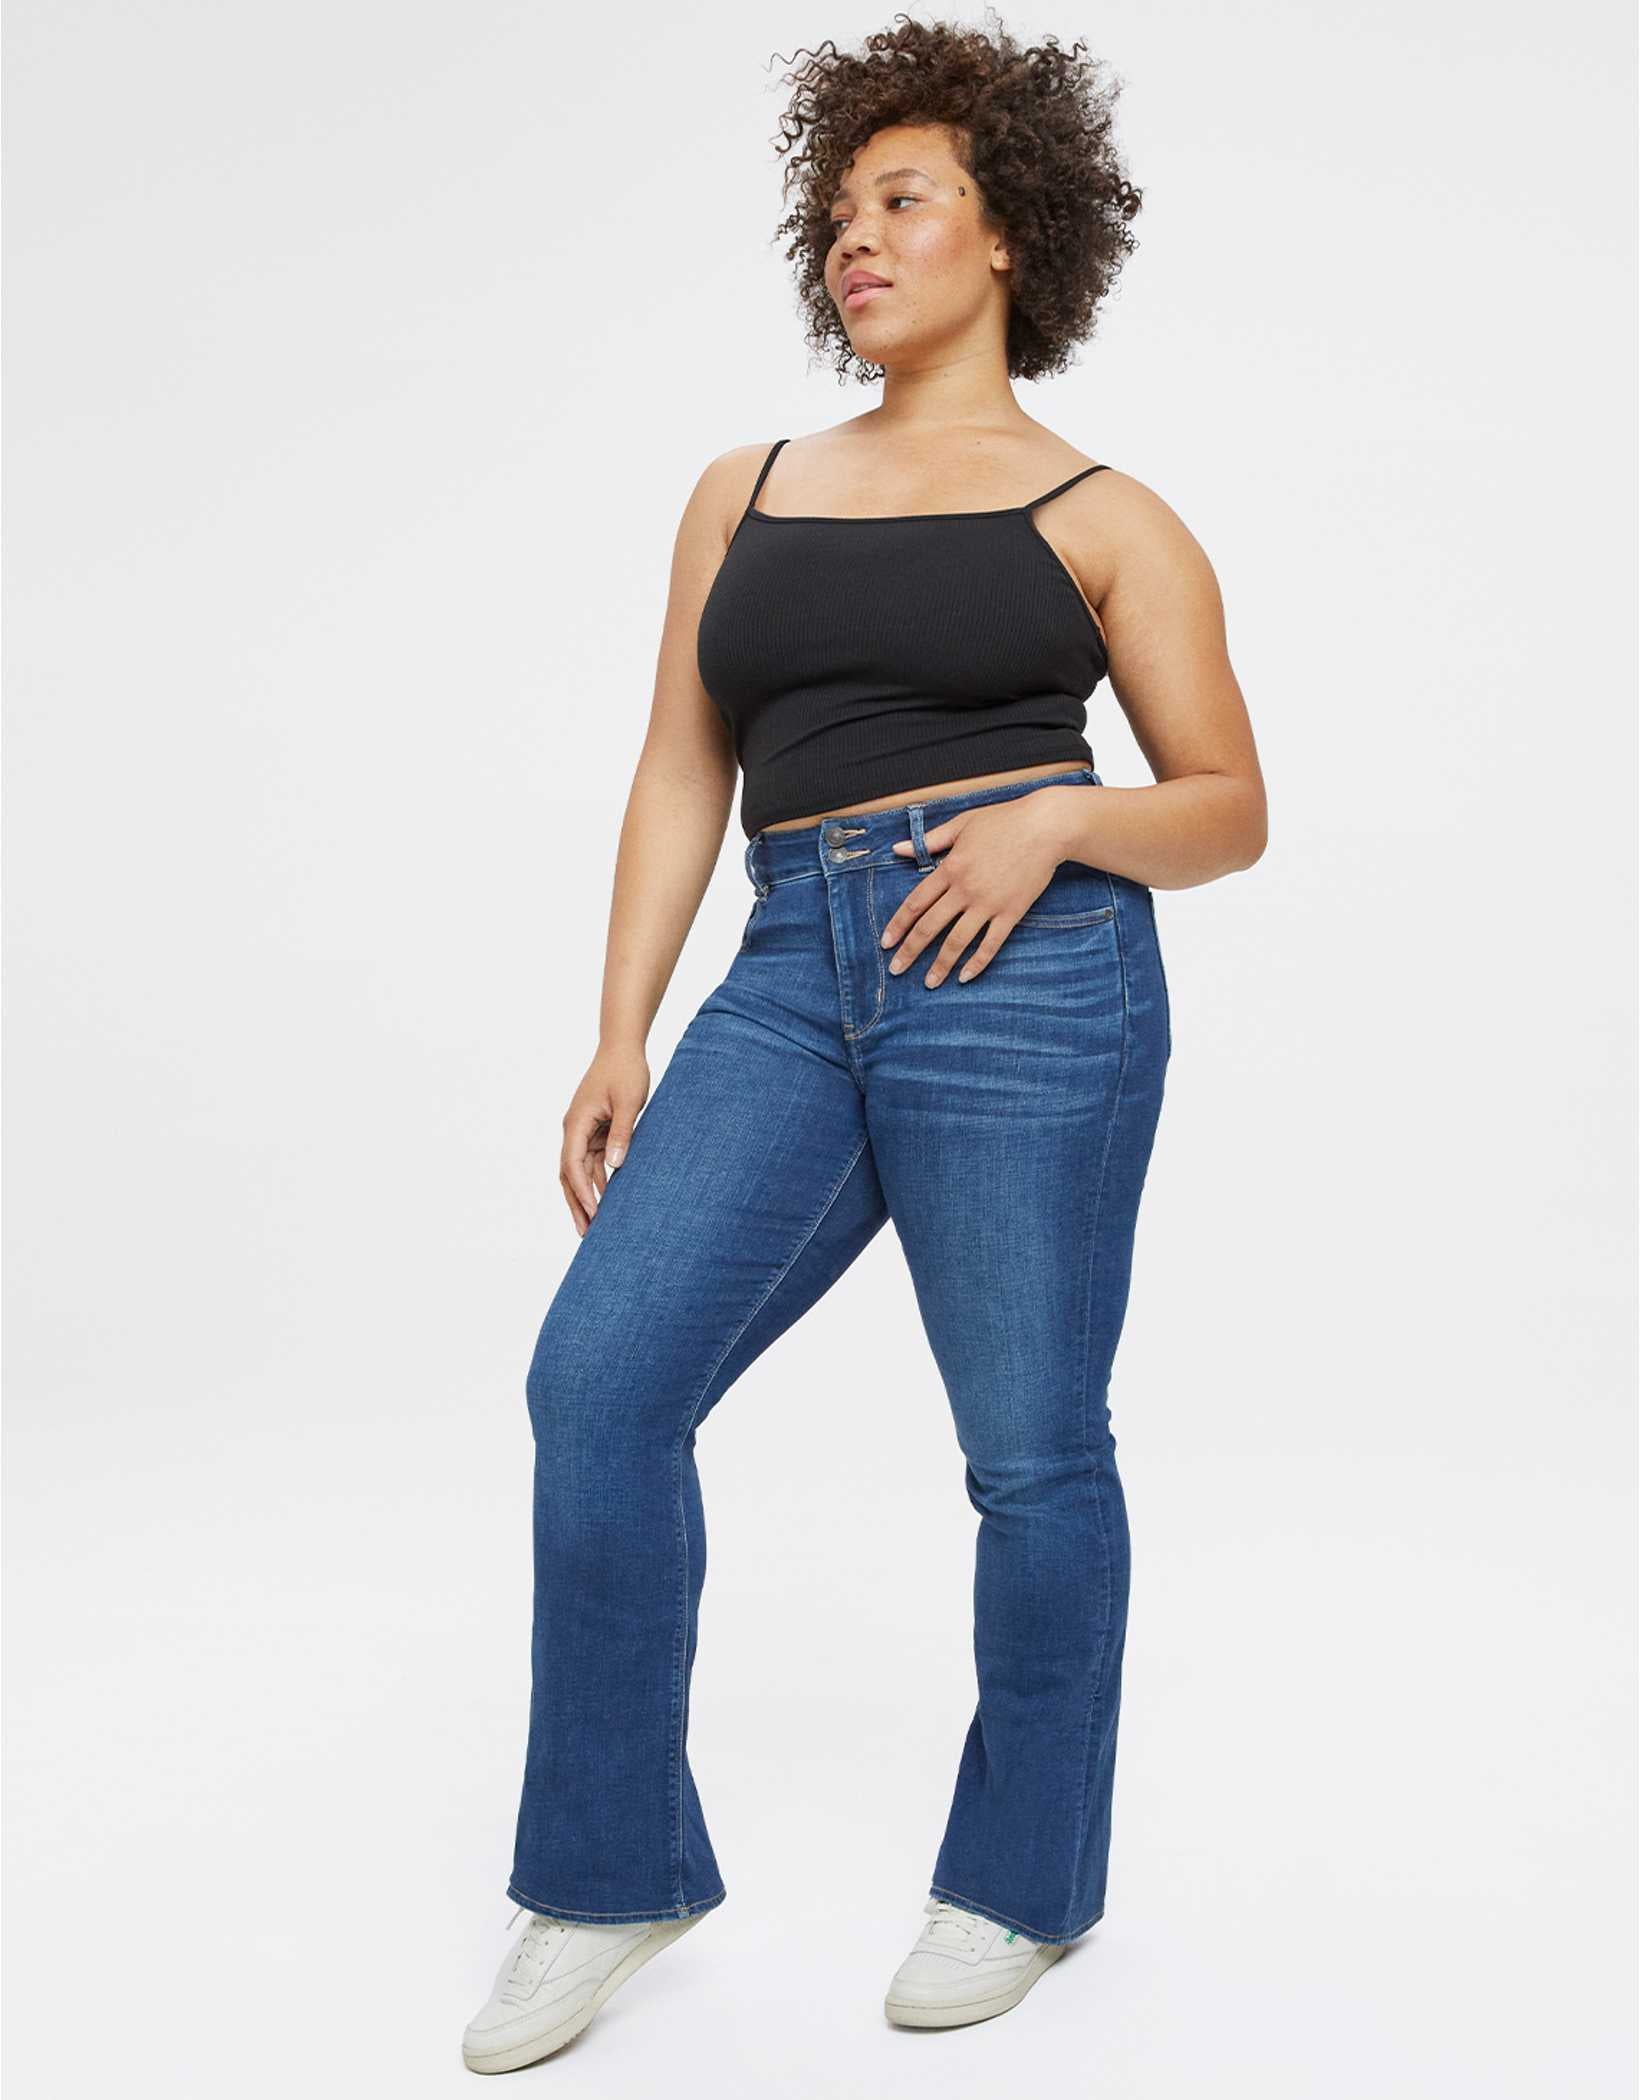 19 Best Pairs Of High-Waisted Flare Jeans 2022